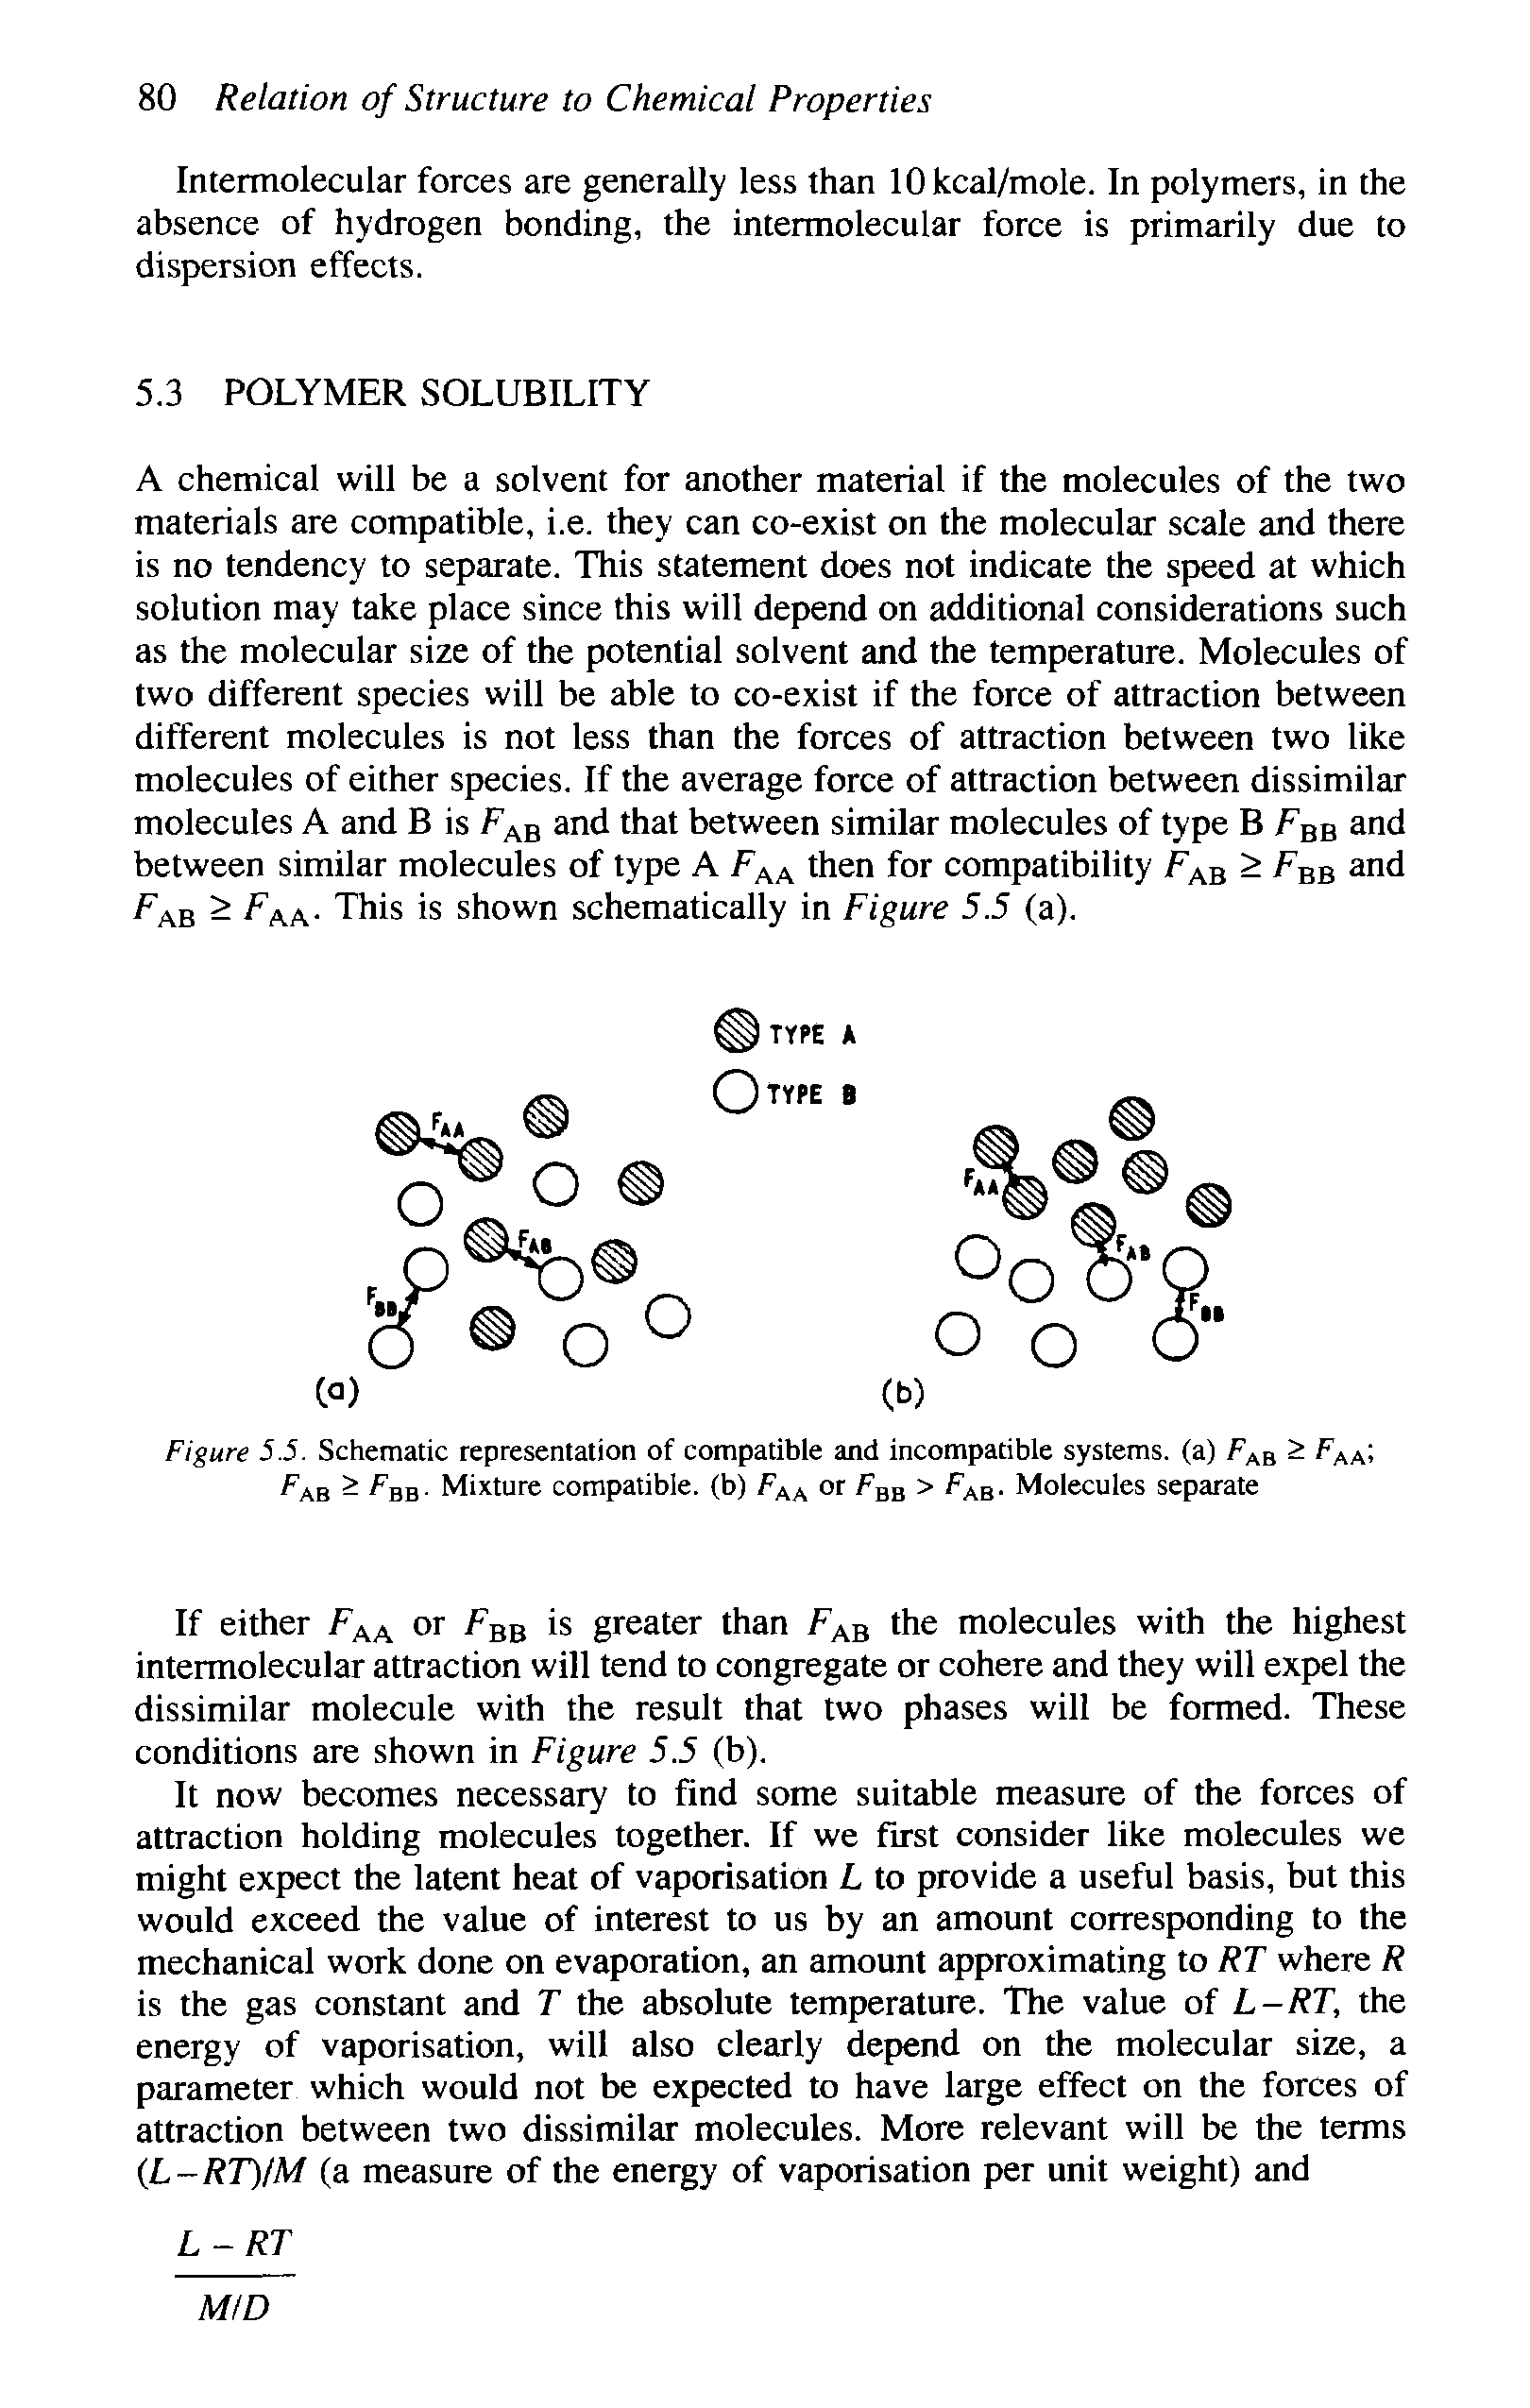 Figure 5.5. Schematic representation of compatible and incompatible systems, (a) Fab Fab - Fbb Mixture compatible, (b) Faa bb > ab- Molecules separate...